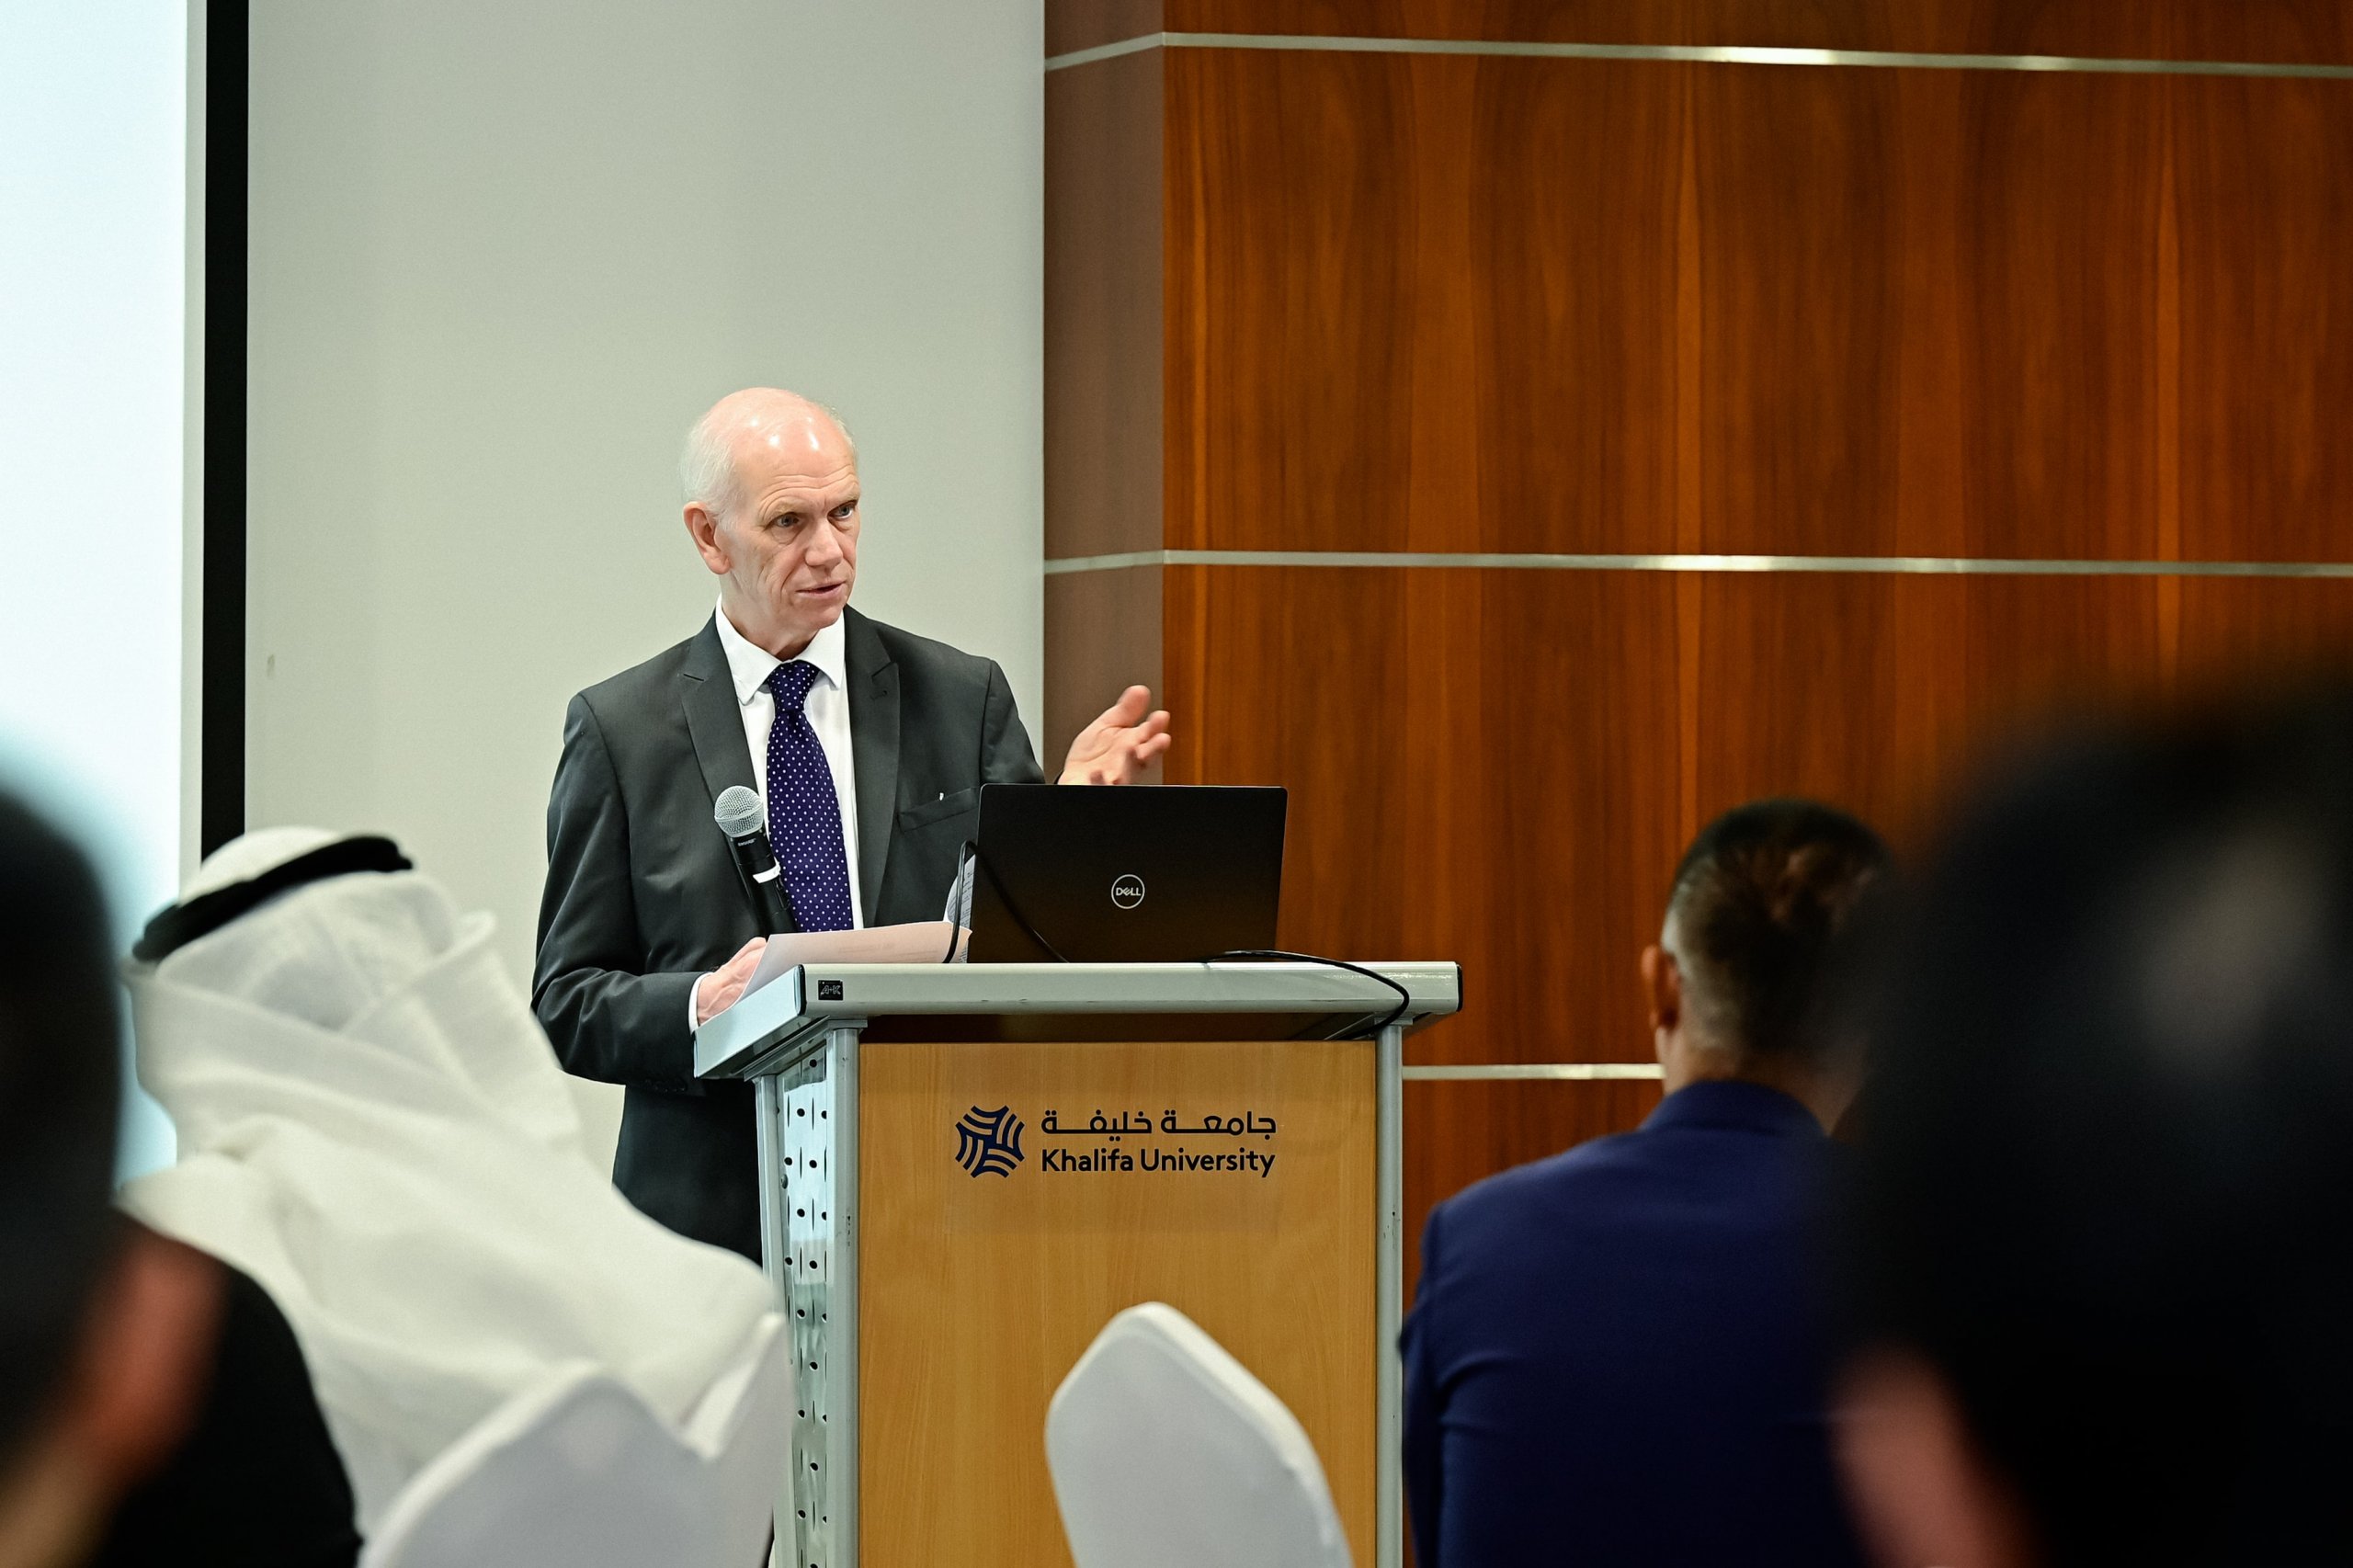 Professor Sir John O’Reilly, President of Khalifa University Discusses Academic Triumphs and Future Growth Plans